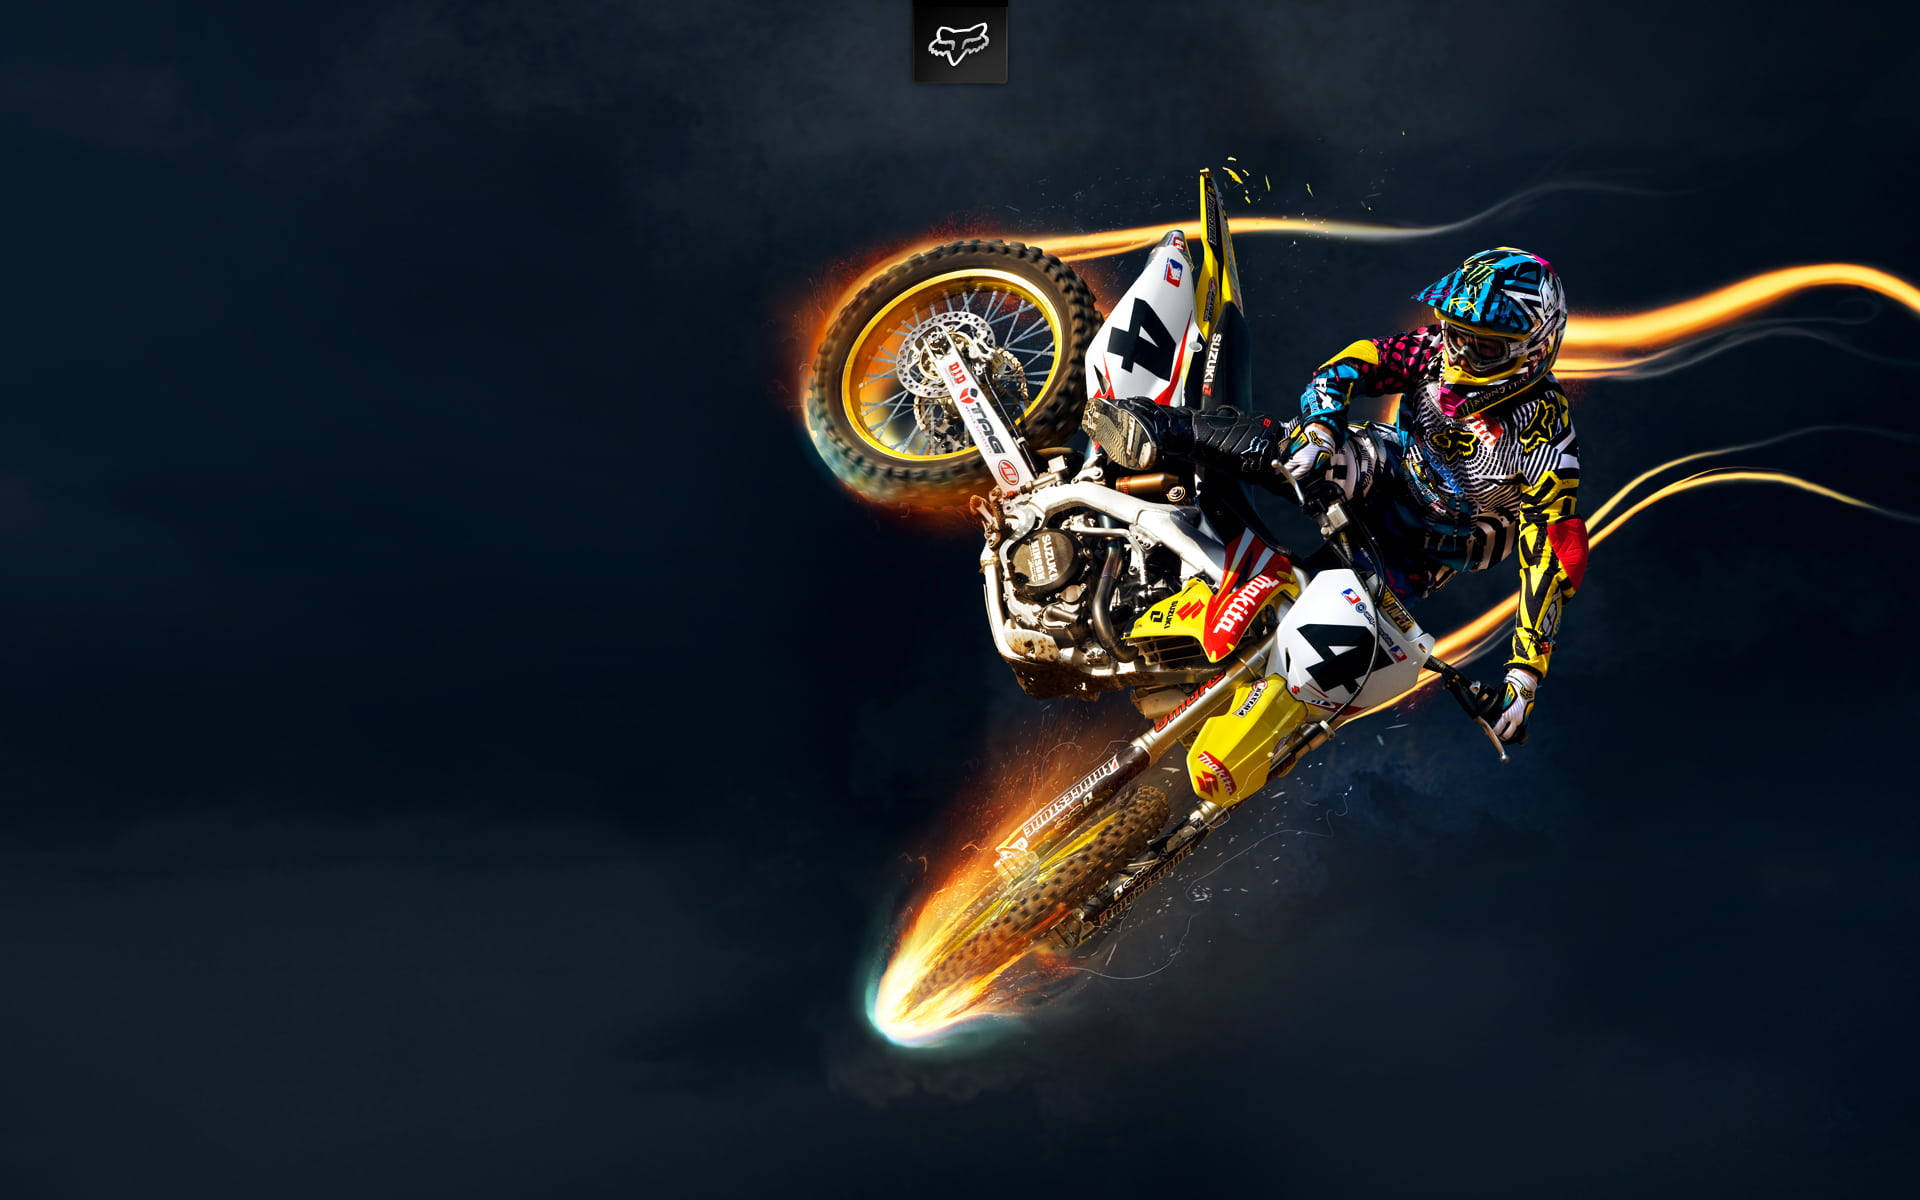 Black Background Flaming Motocross Bike Picture